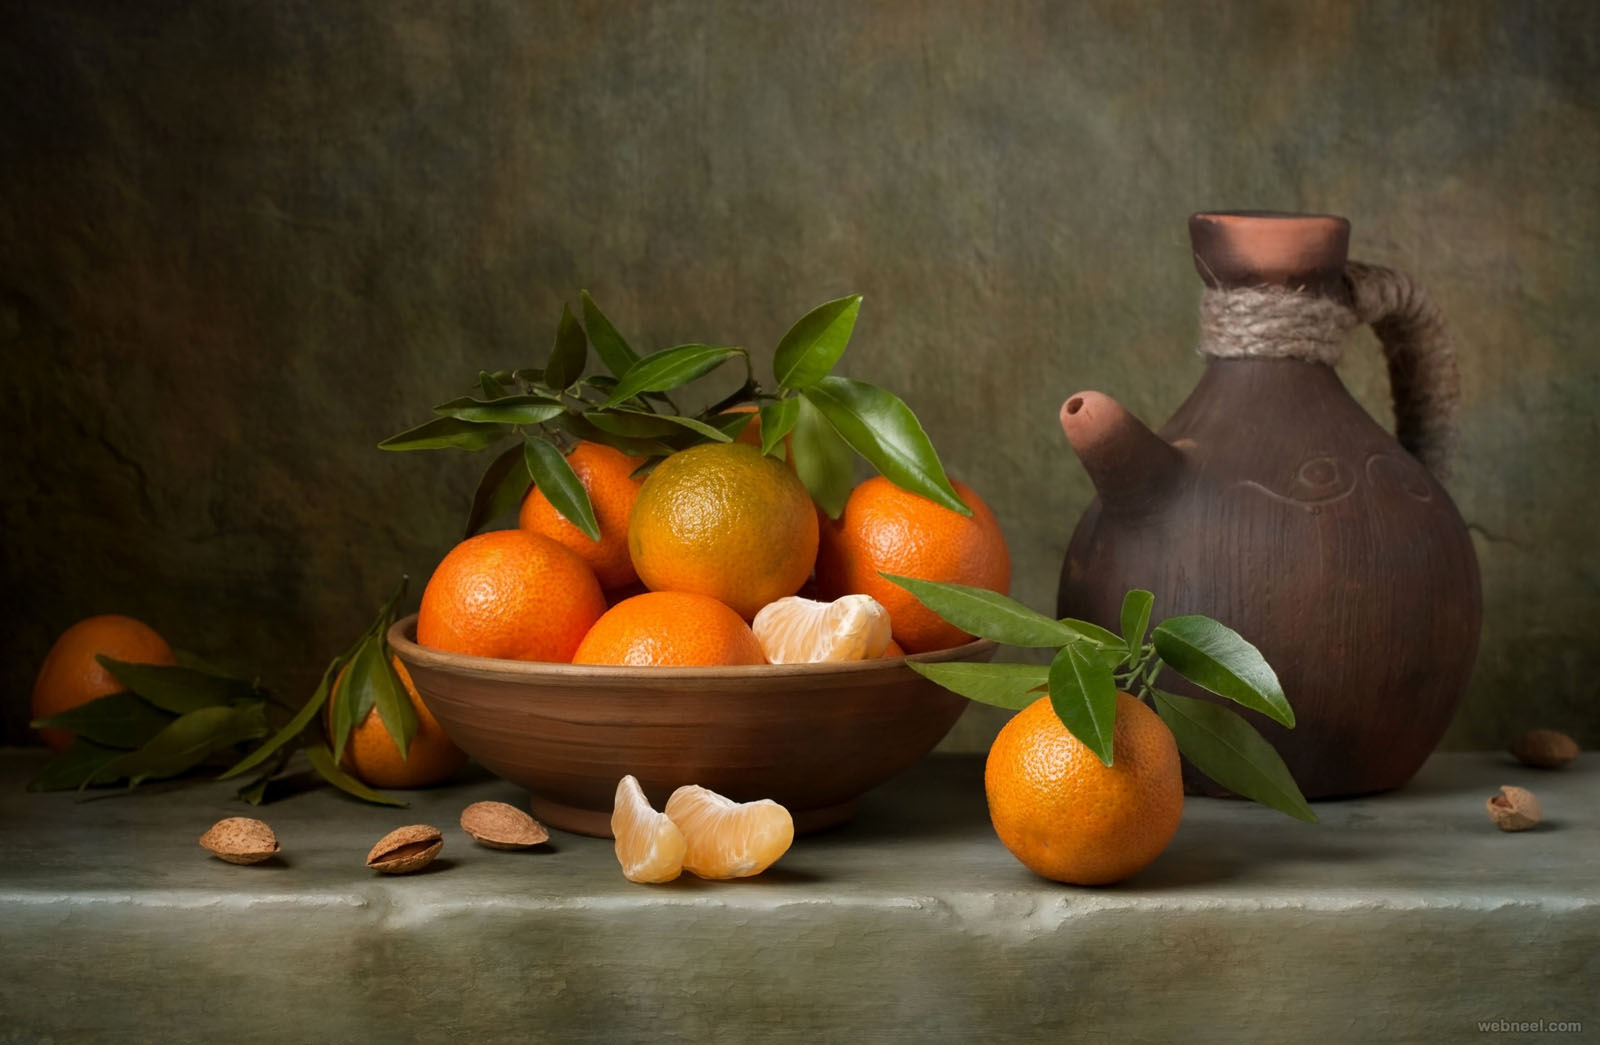 fruits still life photography by sudhirverma